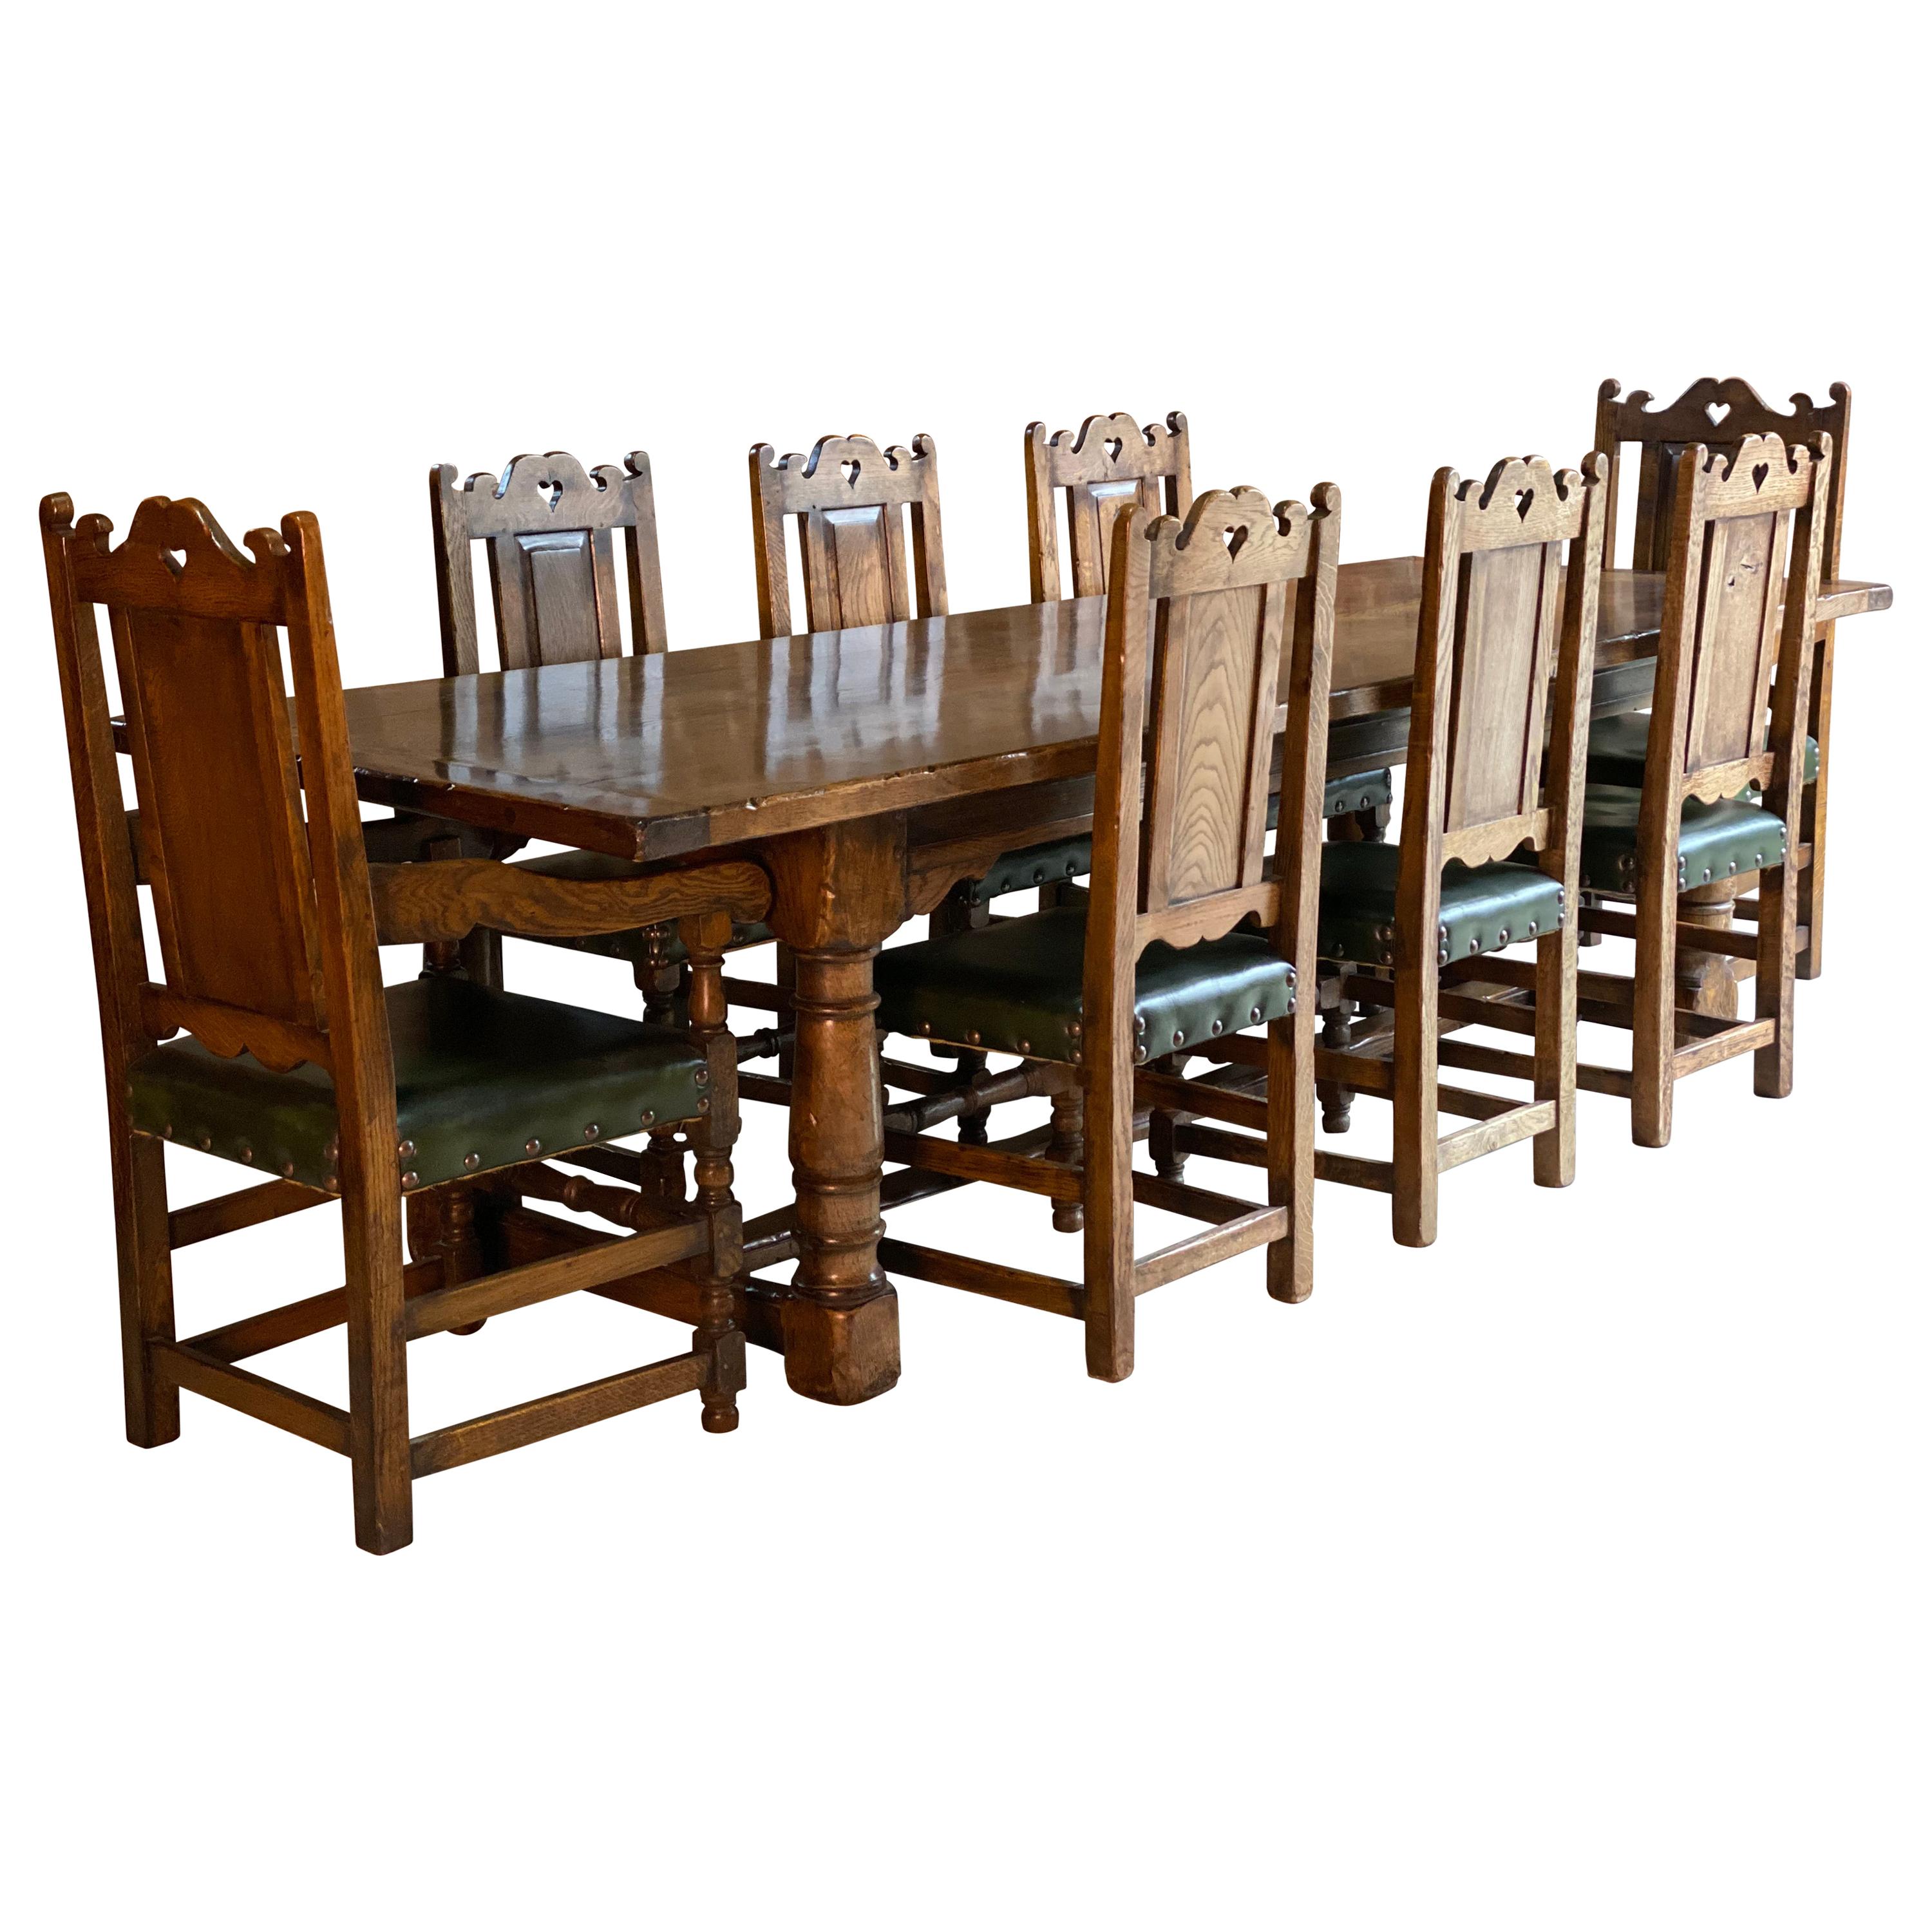 Magnificent Antique Style Oak Refectory Dining Table, Eight Chairs 20th Century